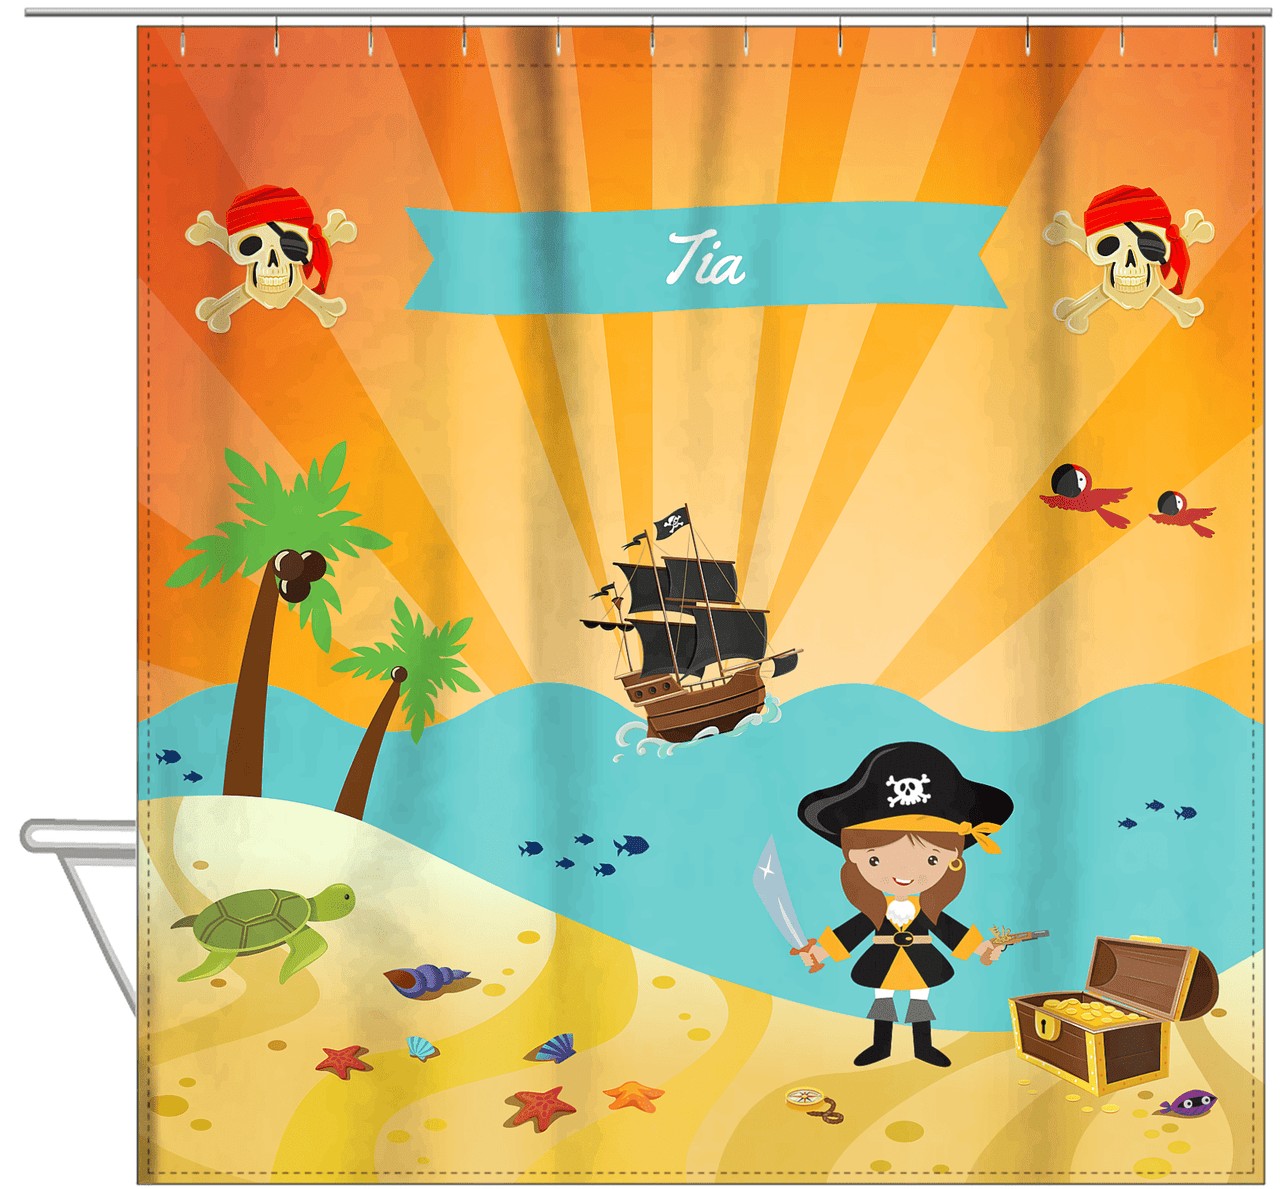 Personalized Pirate Shower Curtain XII - Orange Background - Brunette Girl with Sword - Hanging View